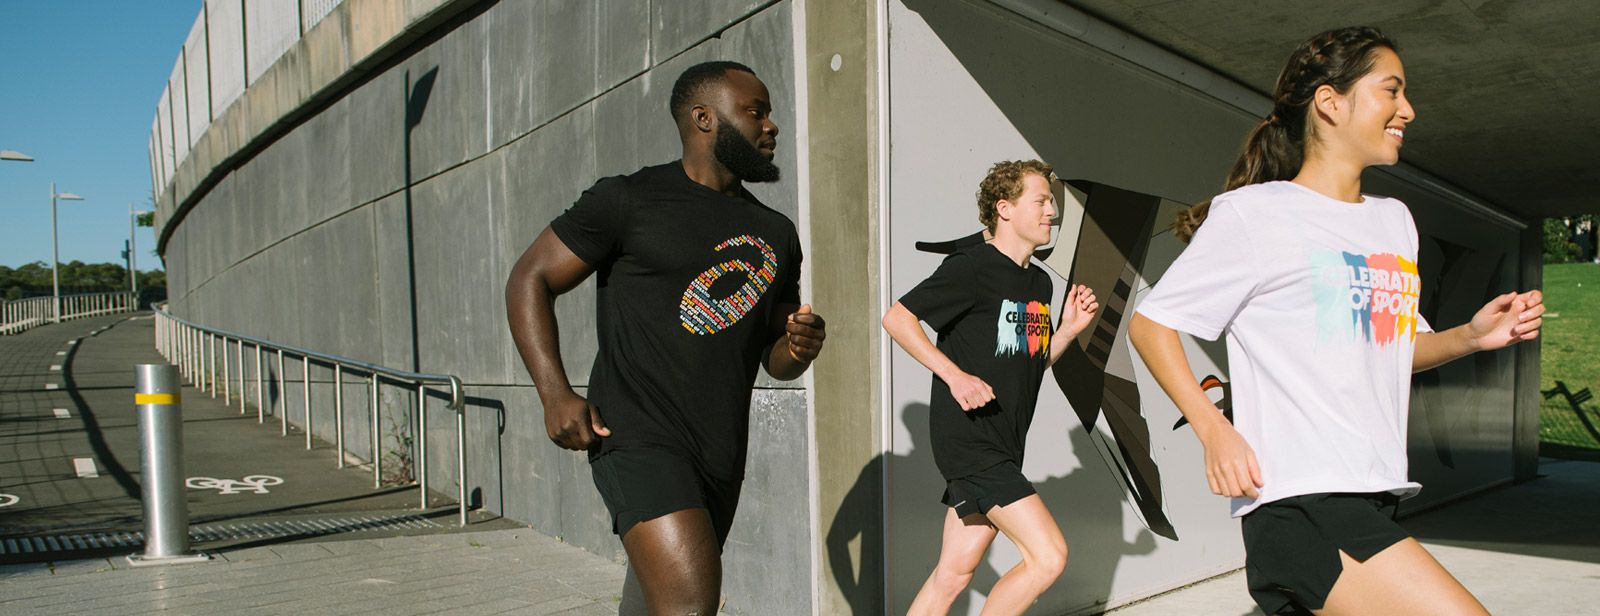 Three athletes running outdoors wearing ASICS celebration of sport footwear and apparel 